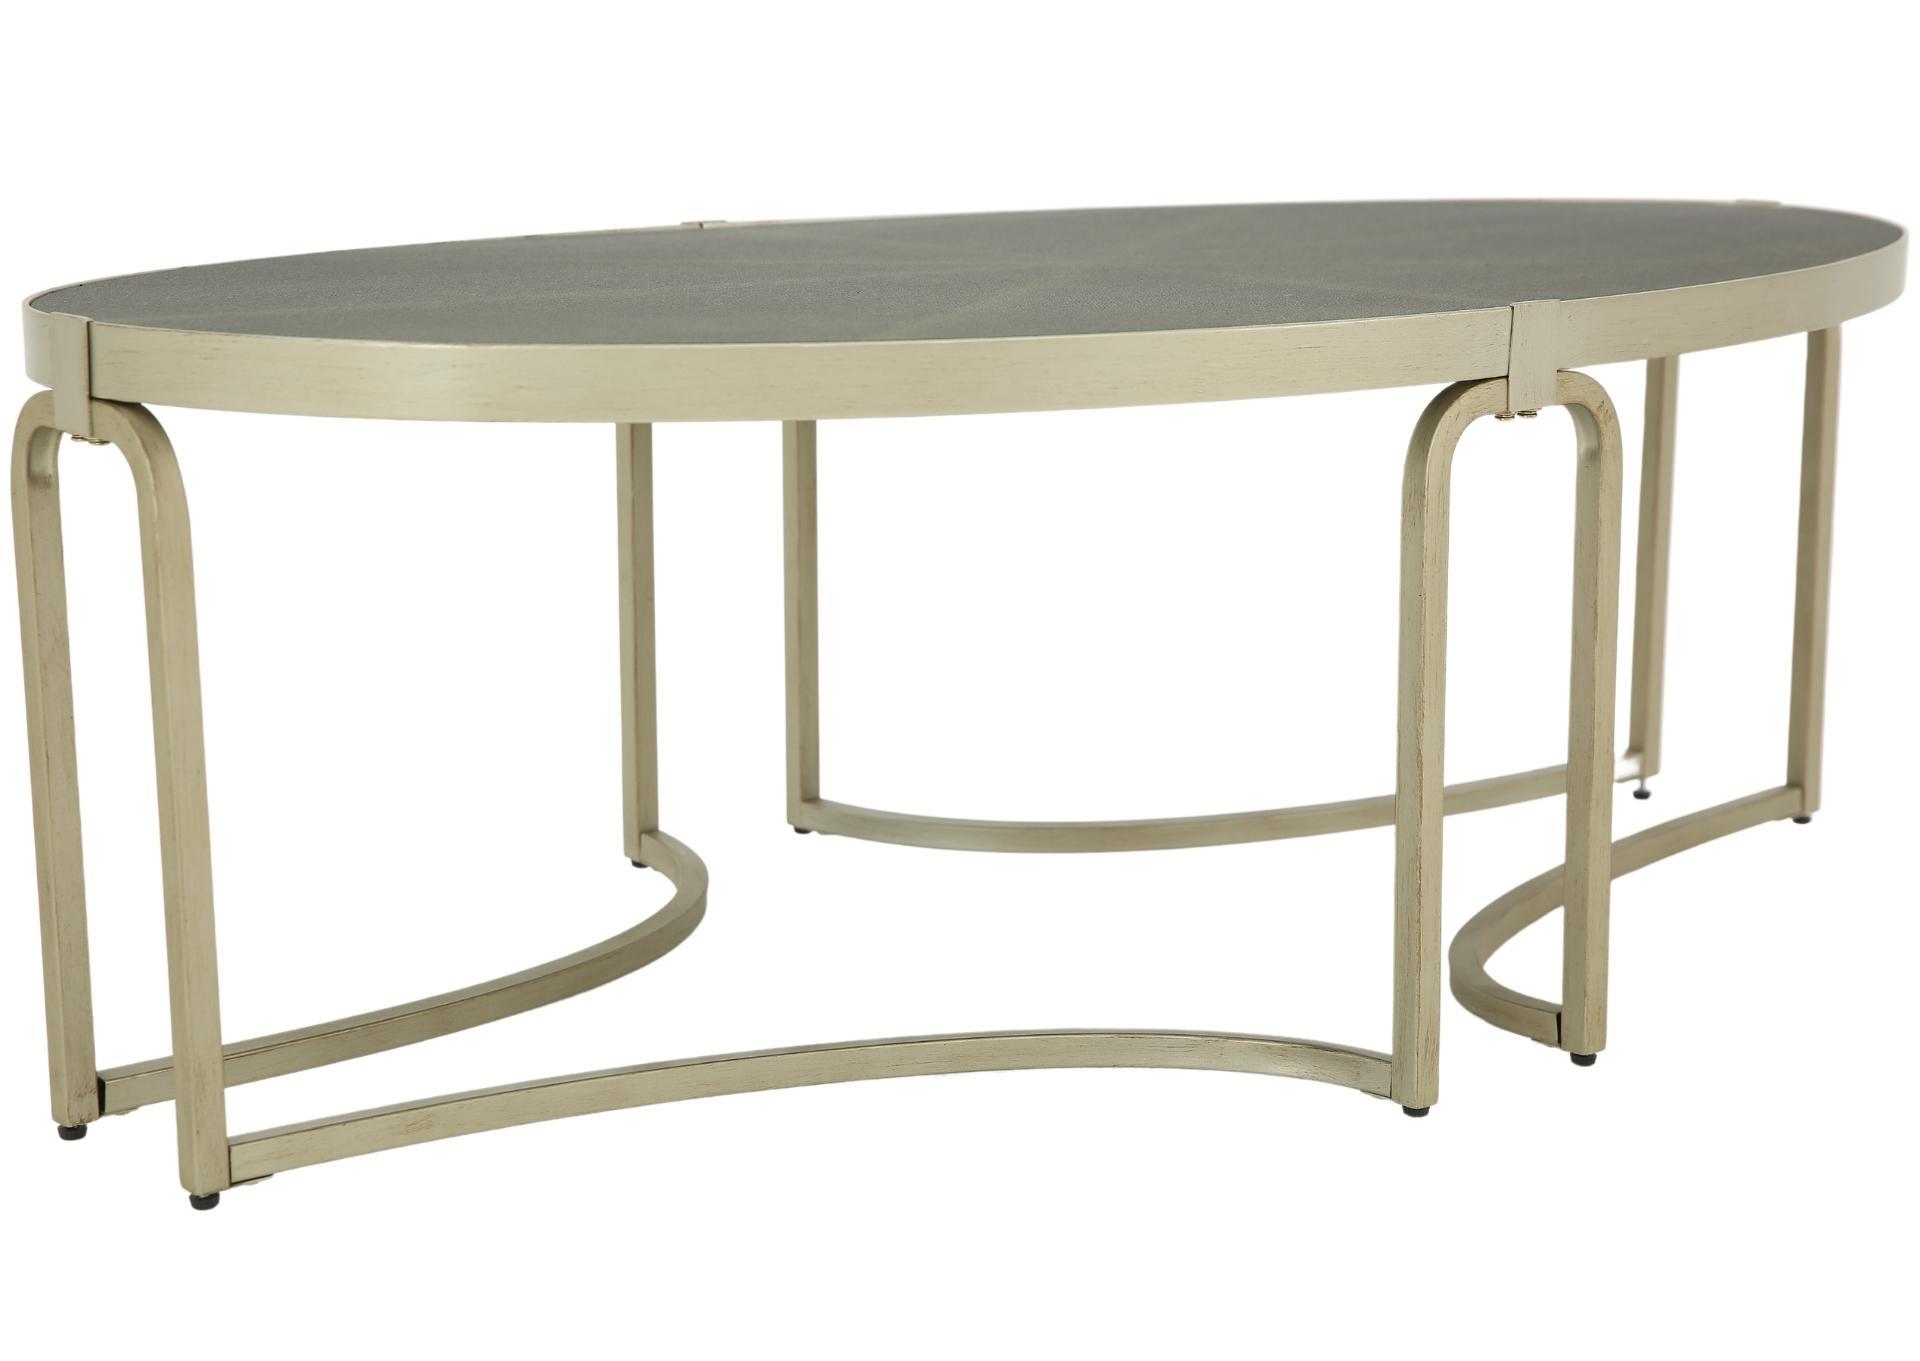 RAY COCKTAIL TABLE,KLAUSSNER